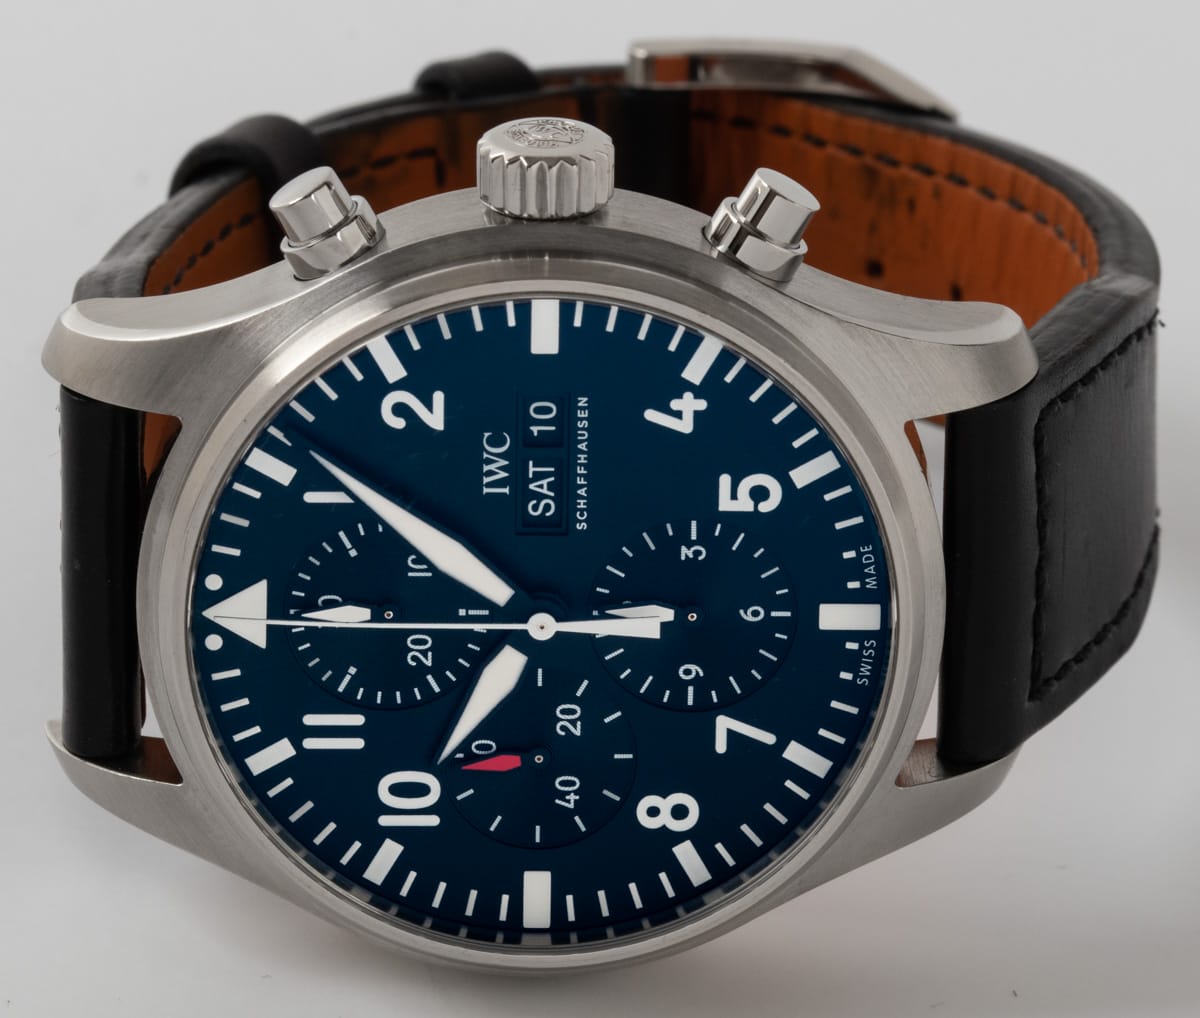 Front View of Pilot's Chronograph